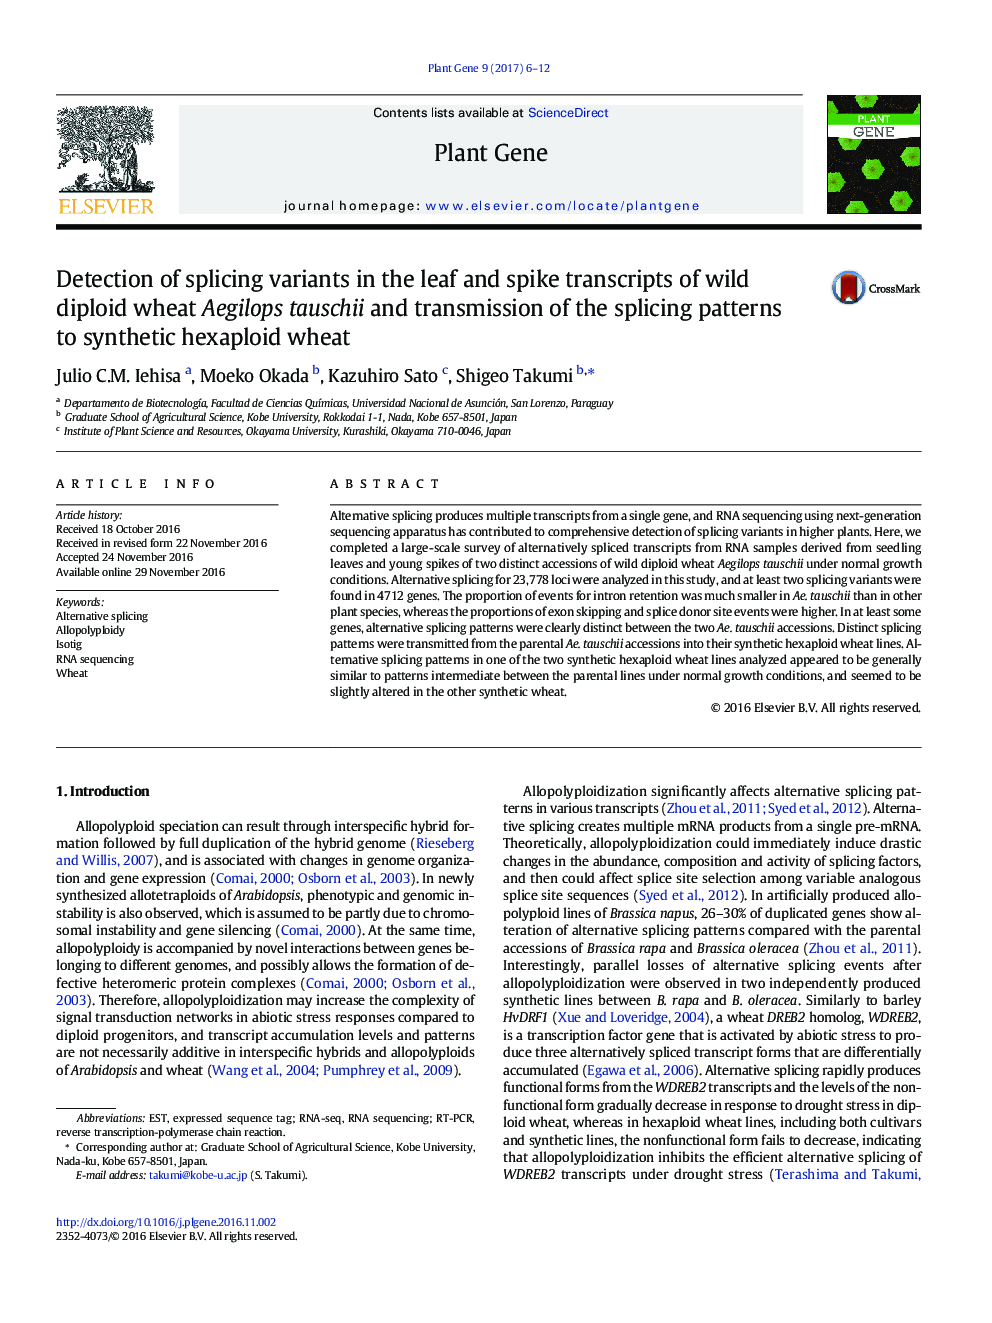 Detection of splicing variants in the leaf and spike transcripts of wild diploid wheat Aegilops tauschii and transmission of the splicing patterns to synthetic hexaploid wheat